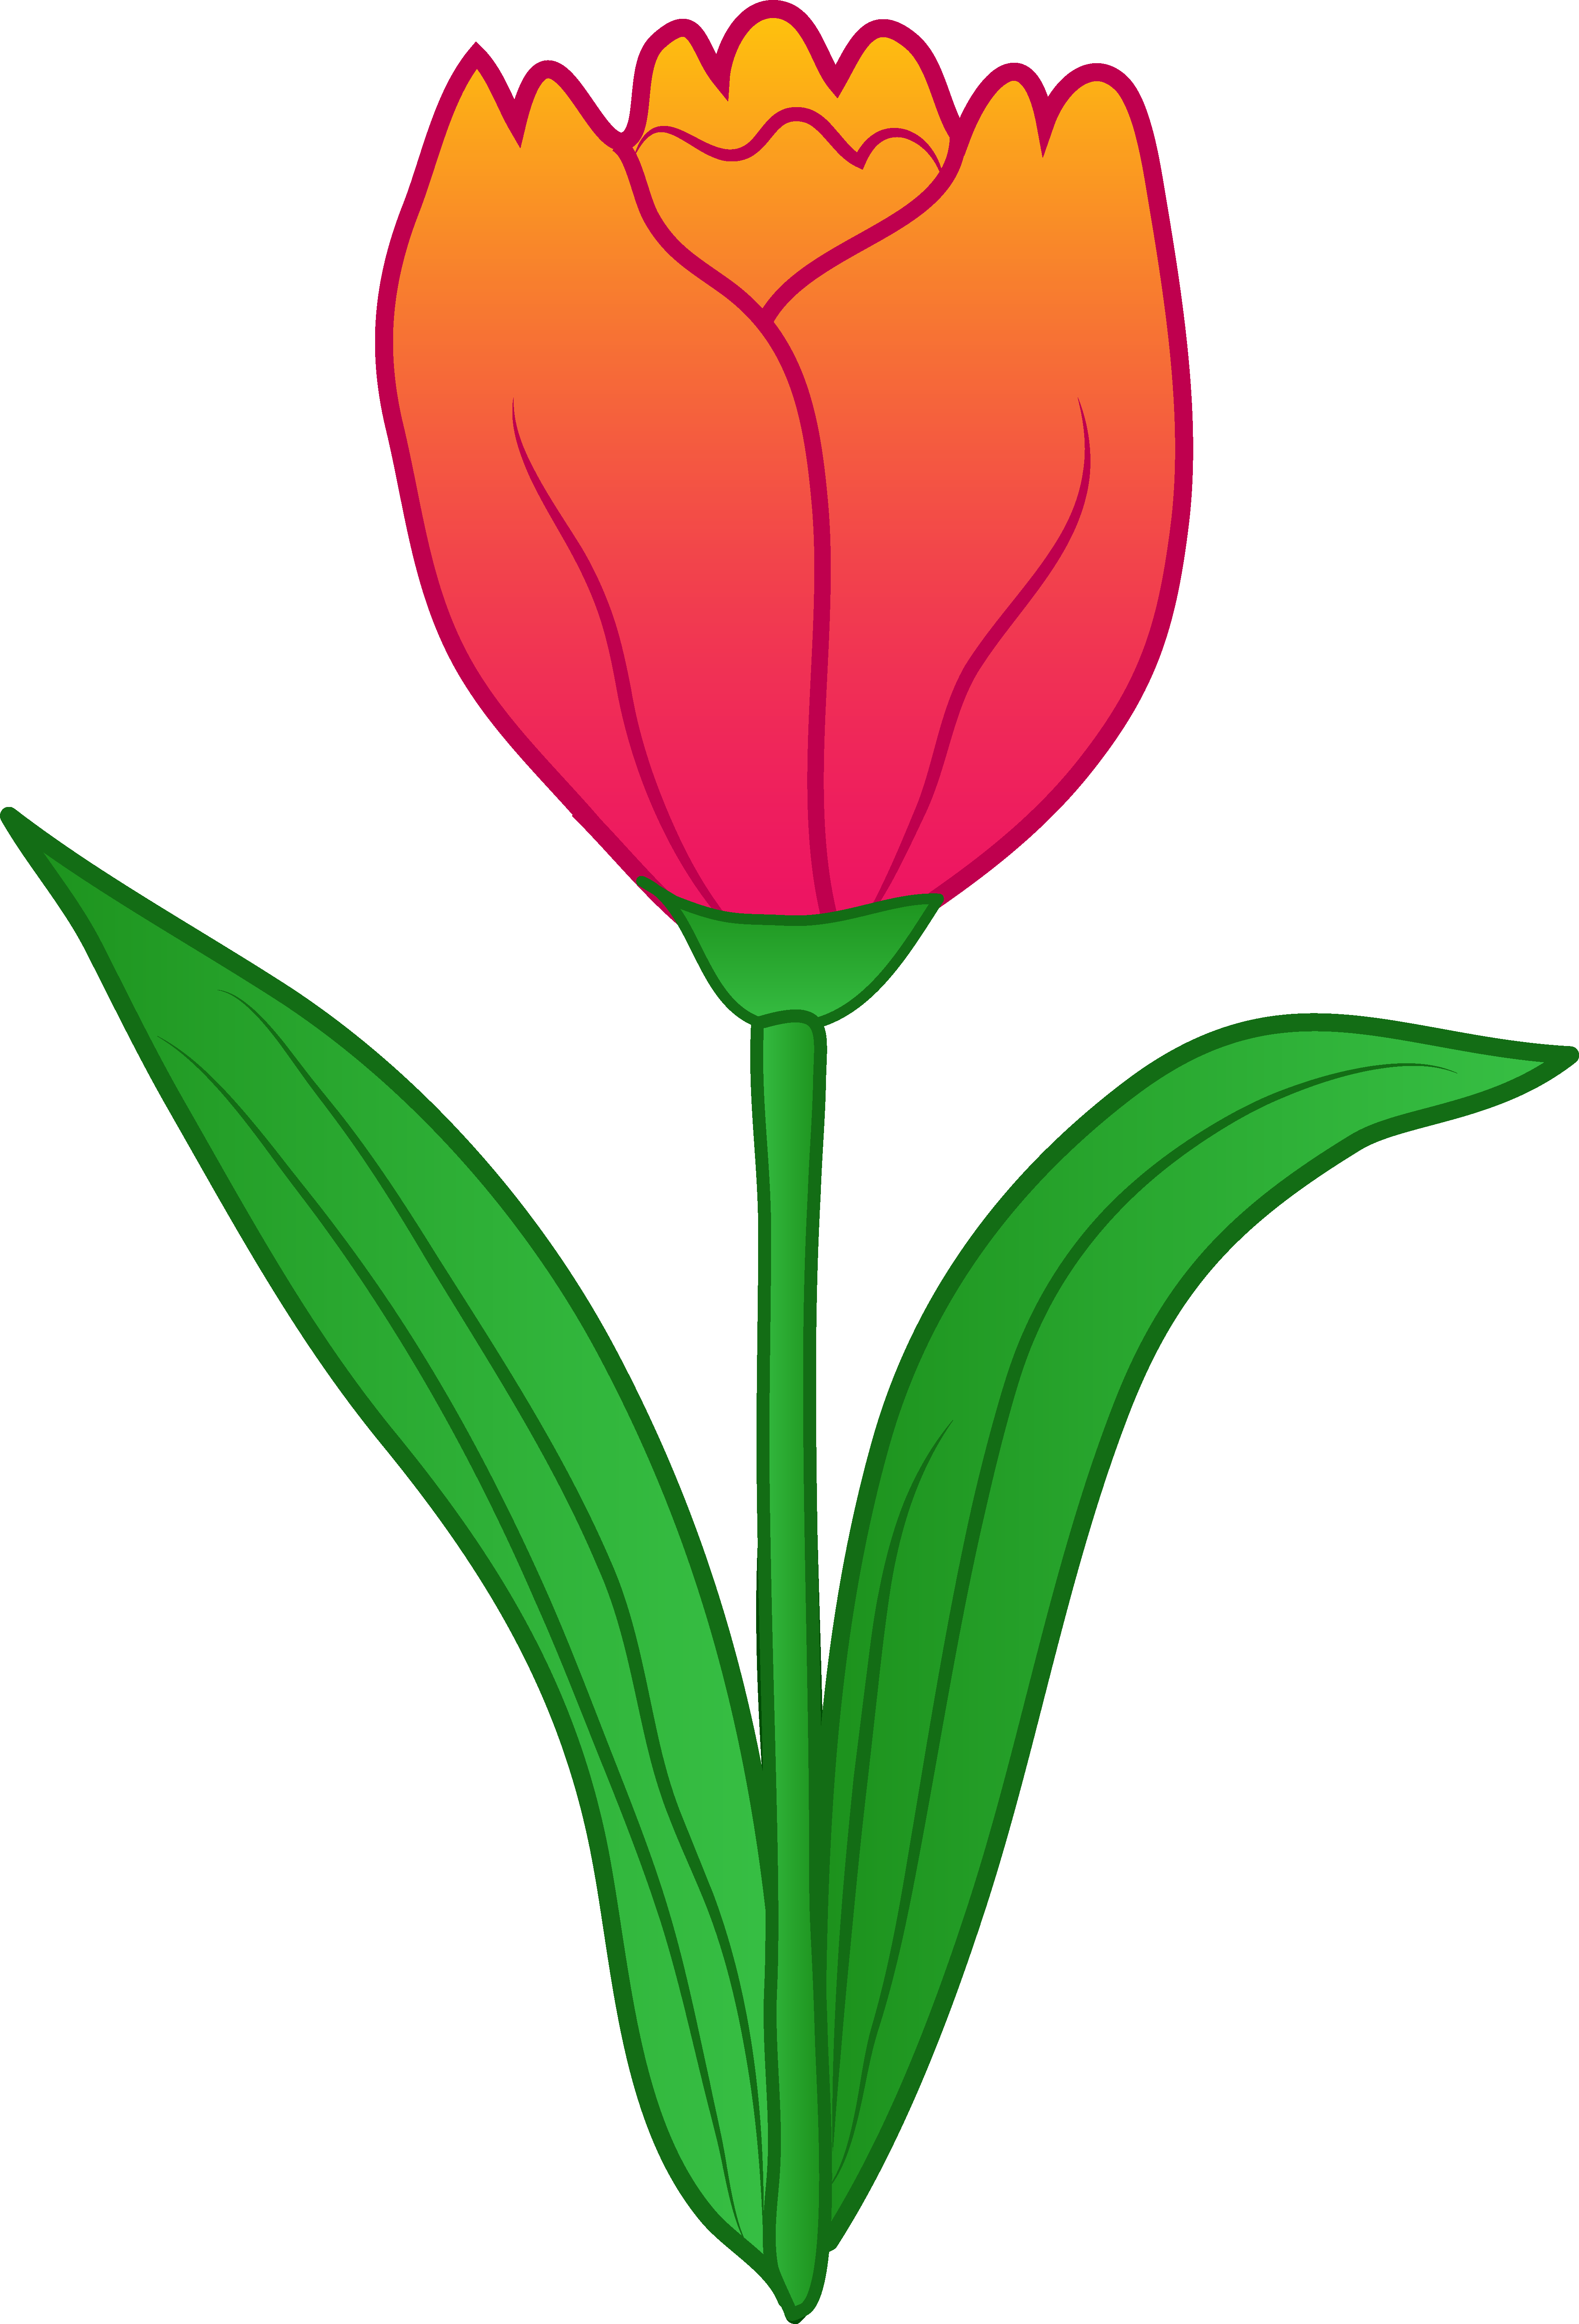 Tulip Clip Art Free | Clipart library - Free Clipart Images